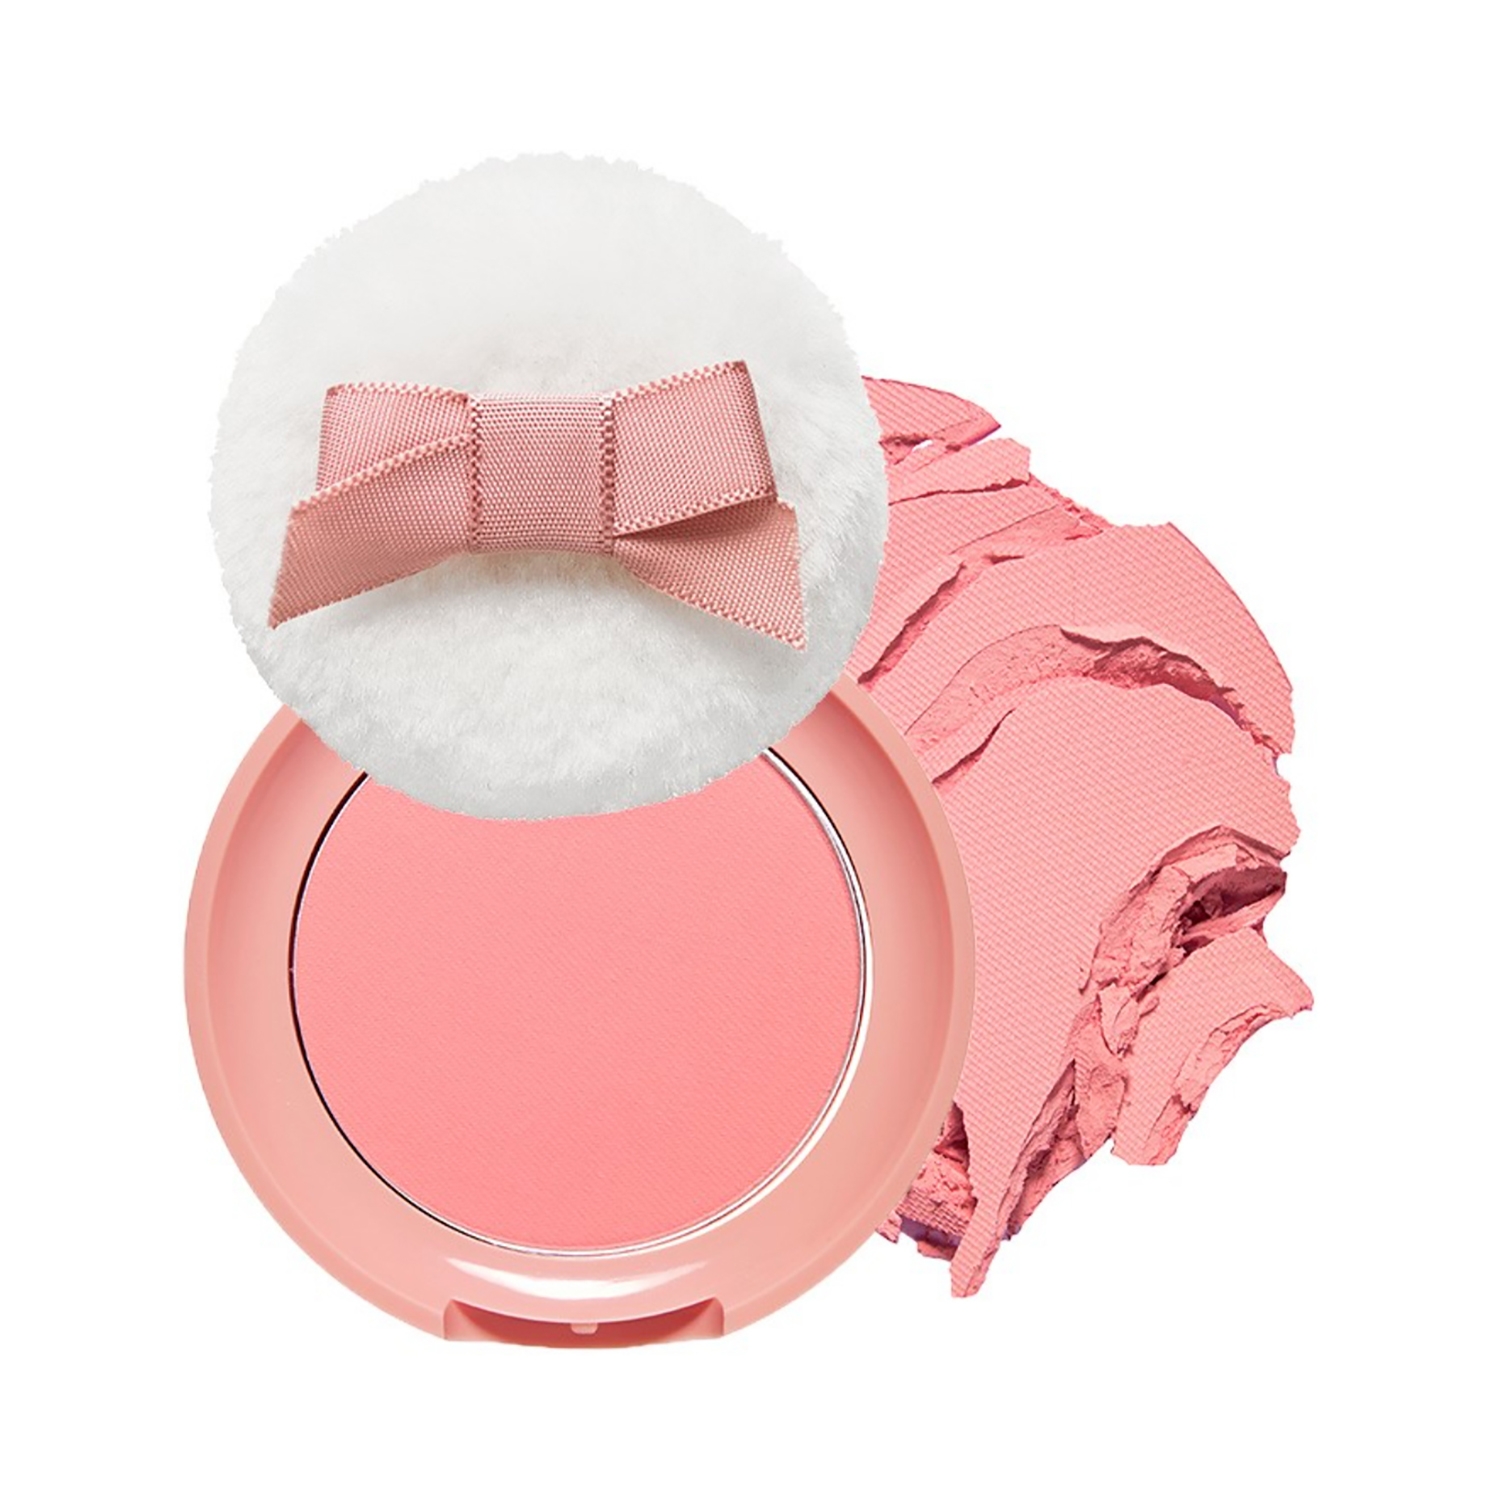 ETUDE HOUSE | ETUDE HOUSE Lovely Cookie Blusher - OR202 Sweet Coral Candy (4g)